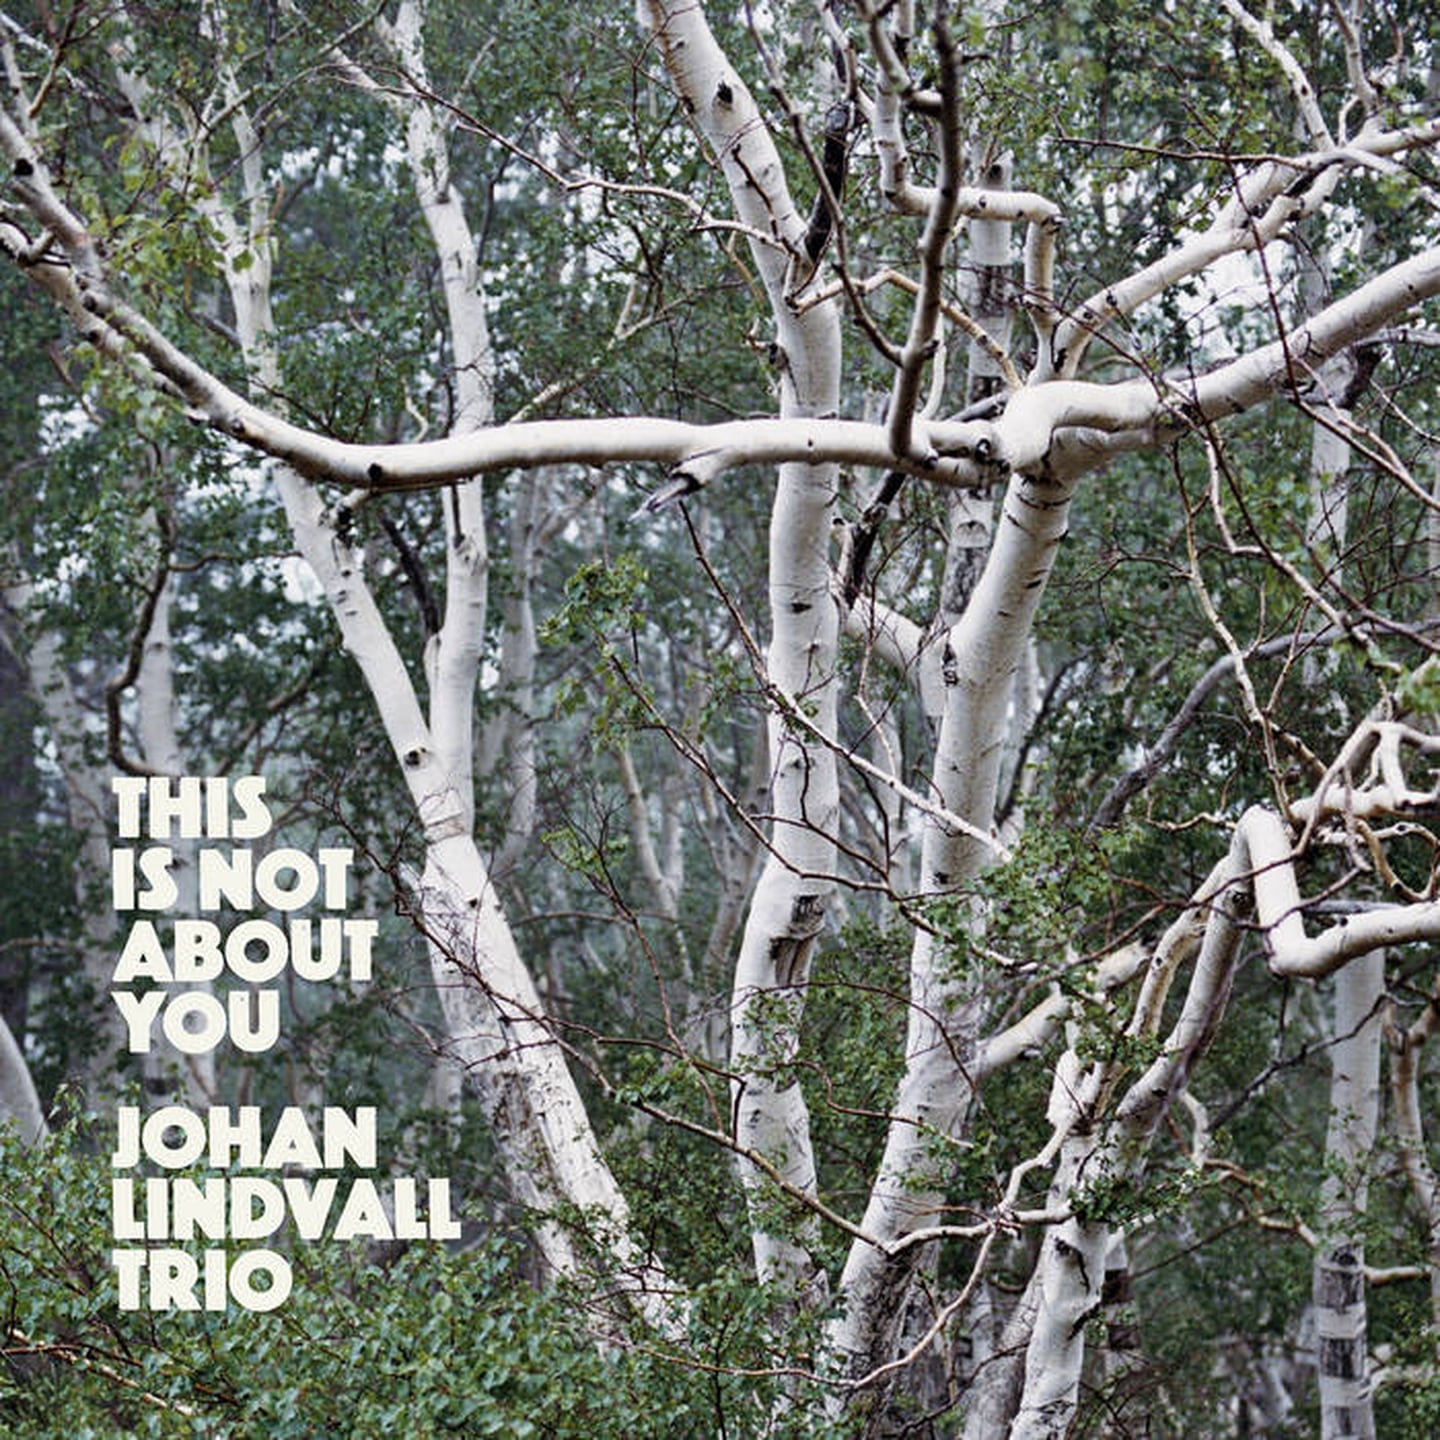 Johan Lindvall Trio: "This Is Not About You"